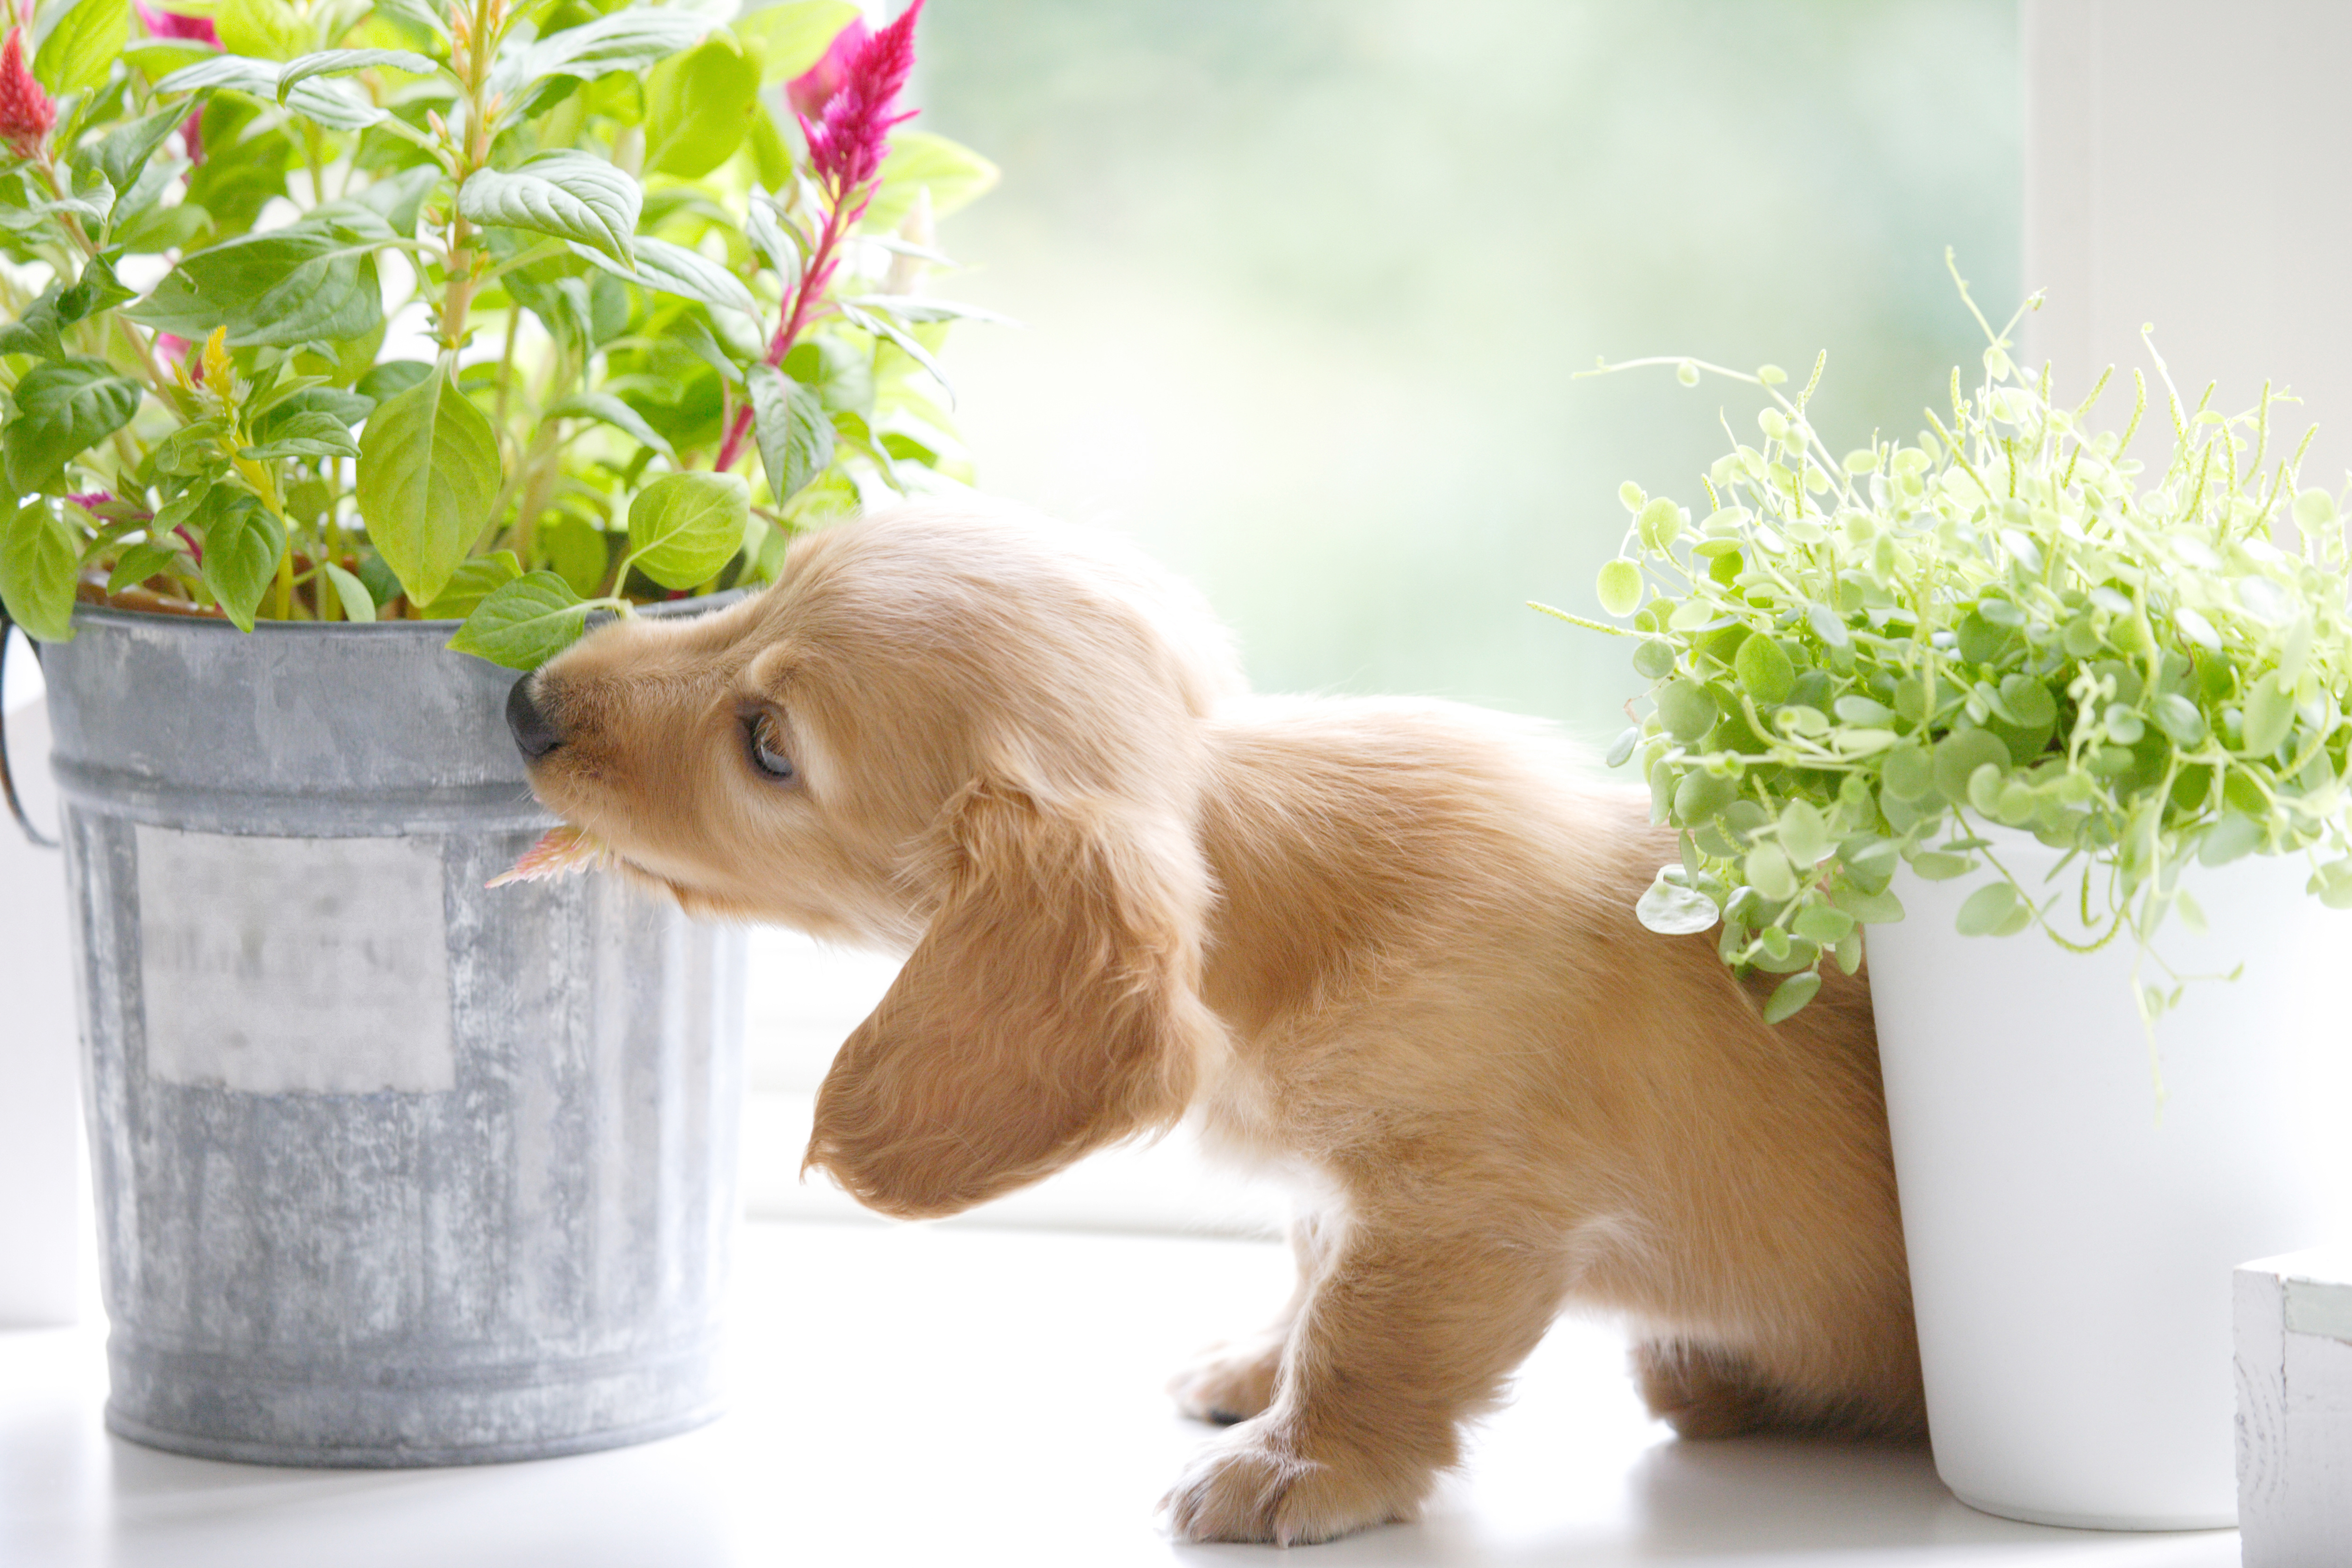 Plants That Are Toxic to Dogs